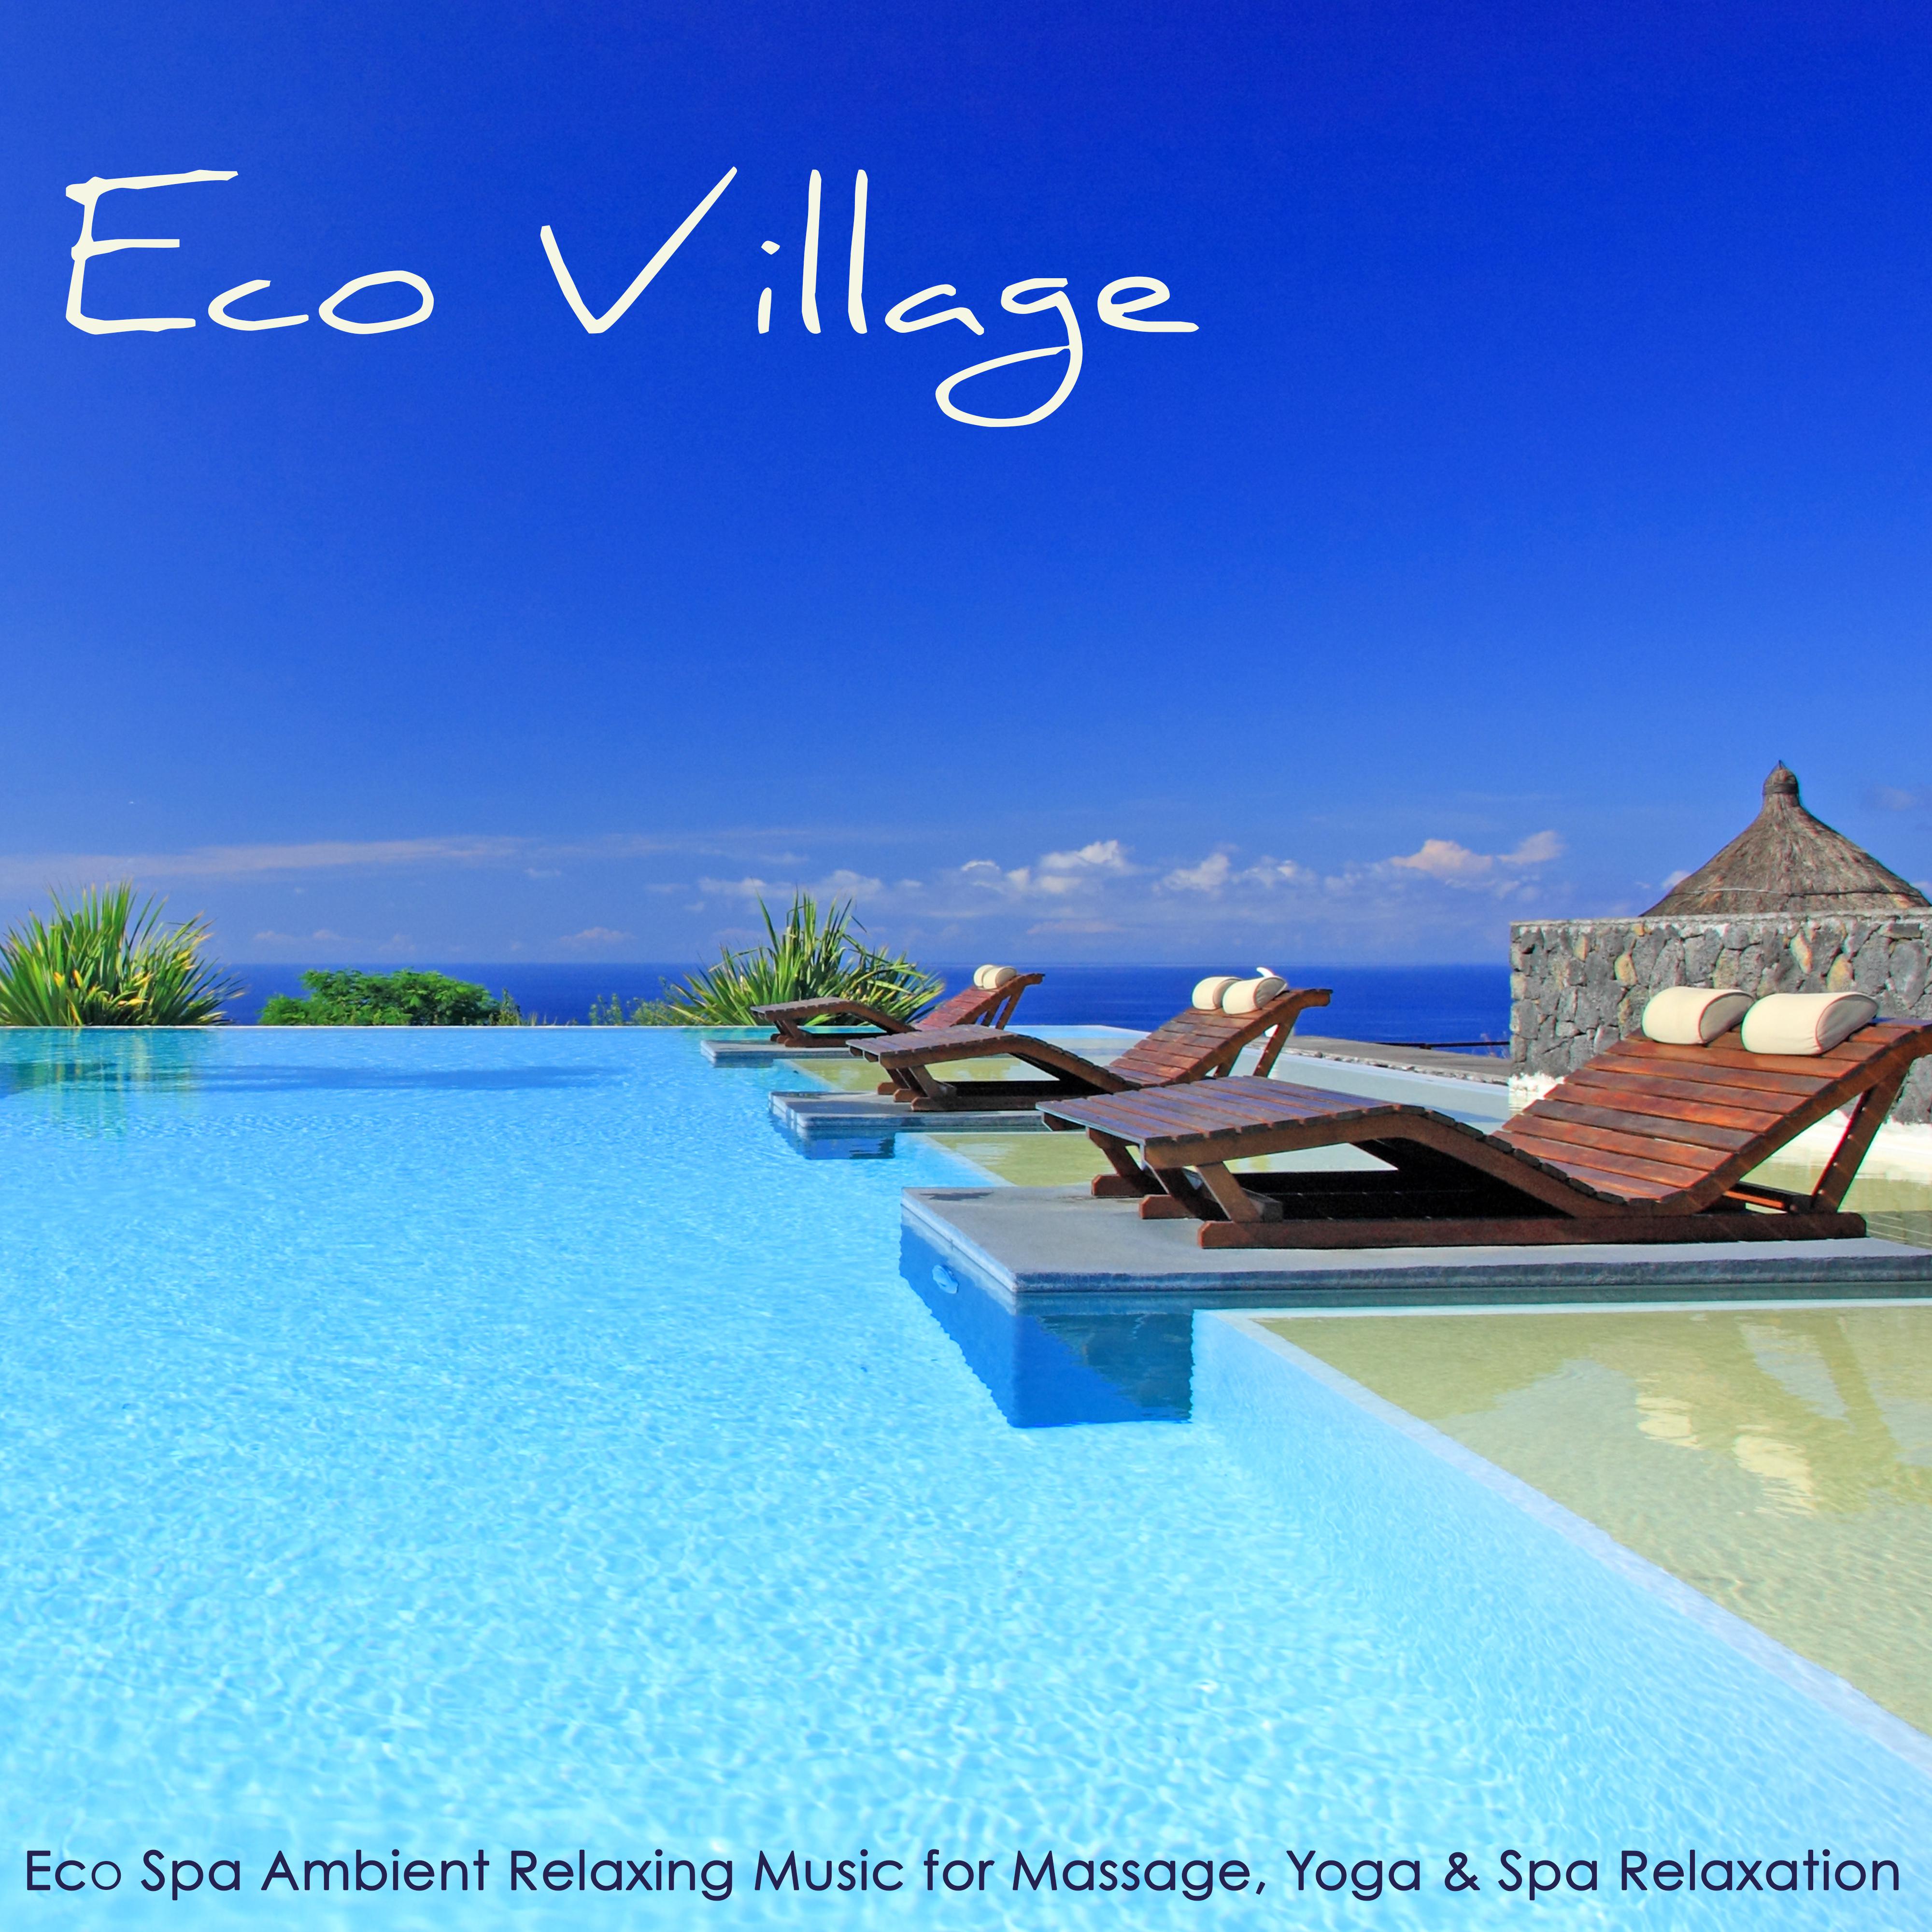 Eco Village - Eco Spa Ambient Relaxing Music for Massage, Yoga & Spa Relaxation